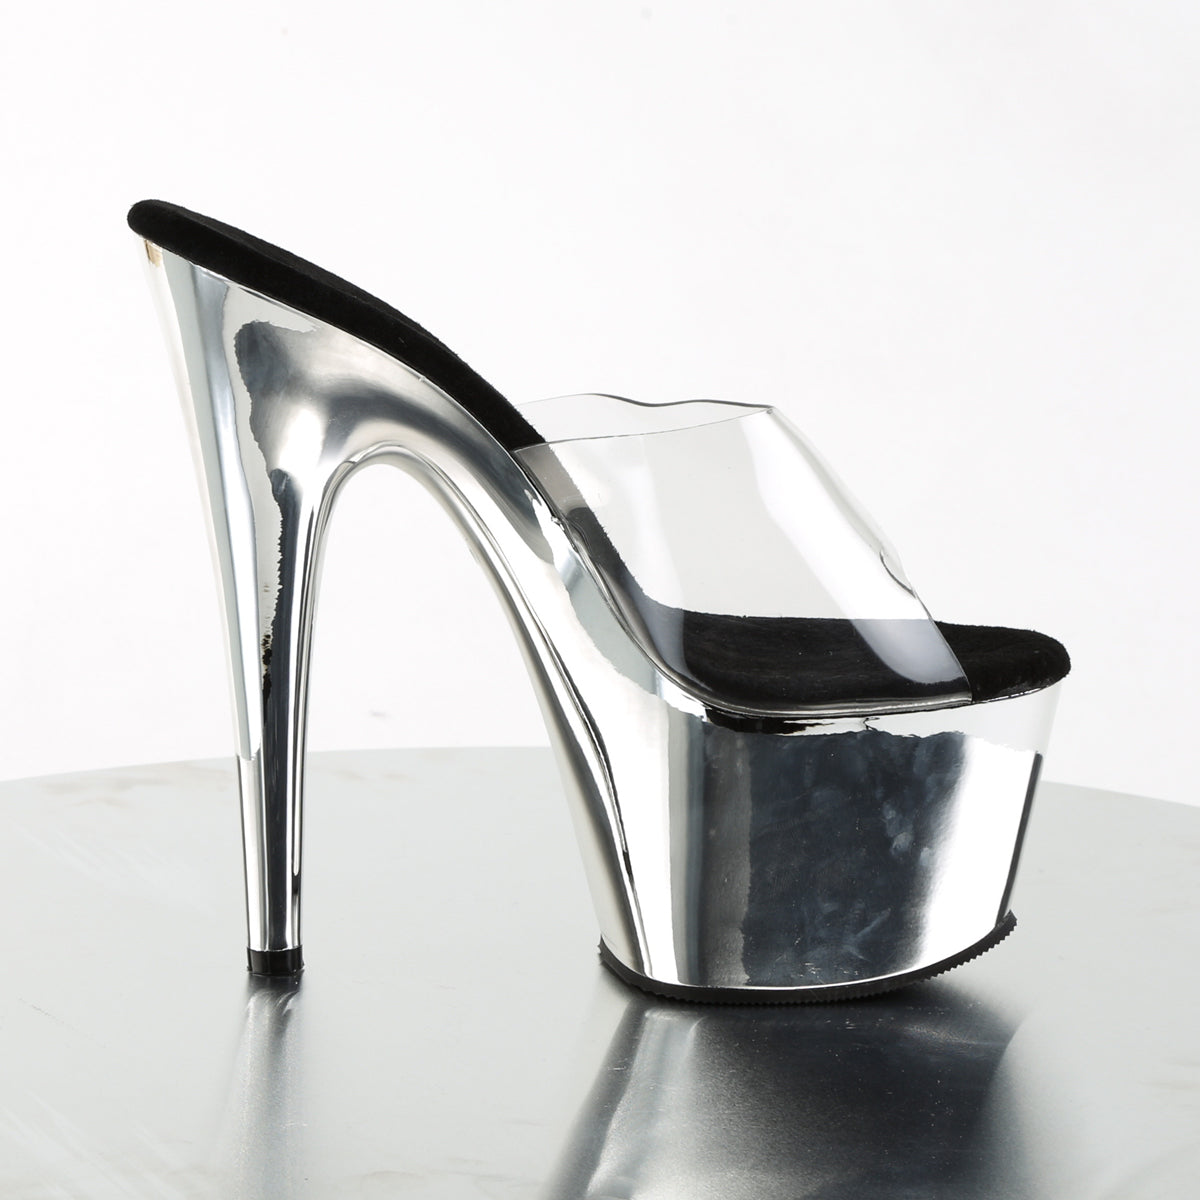 ADORE-701 Sexy 7" Heel Clear Silver Chrome Stripper Sandals-Pleaser- Sexy Shoes Fetish Heels